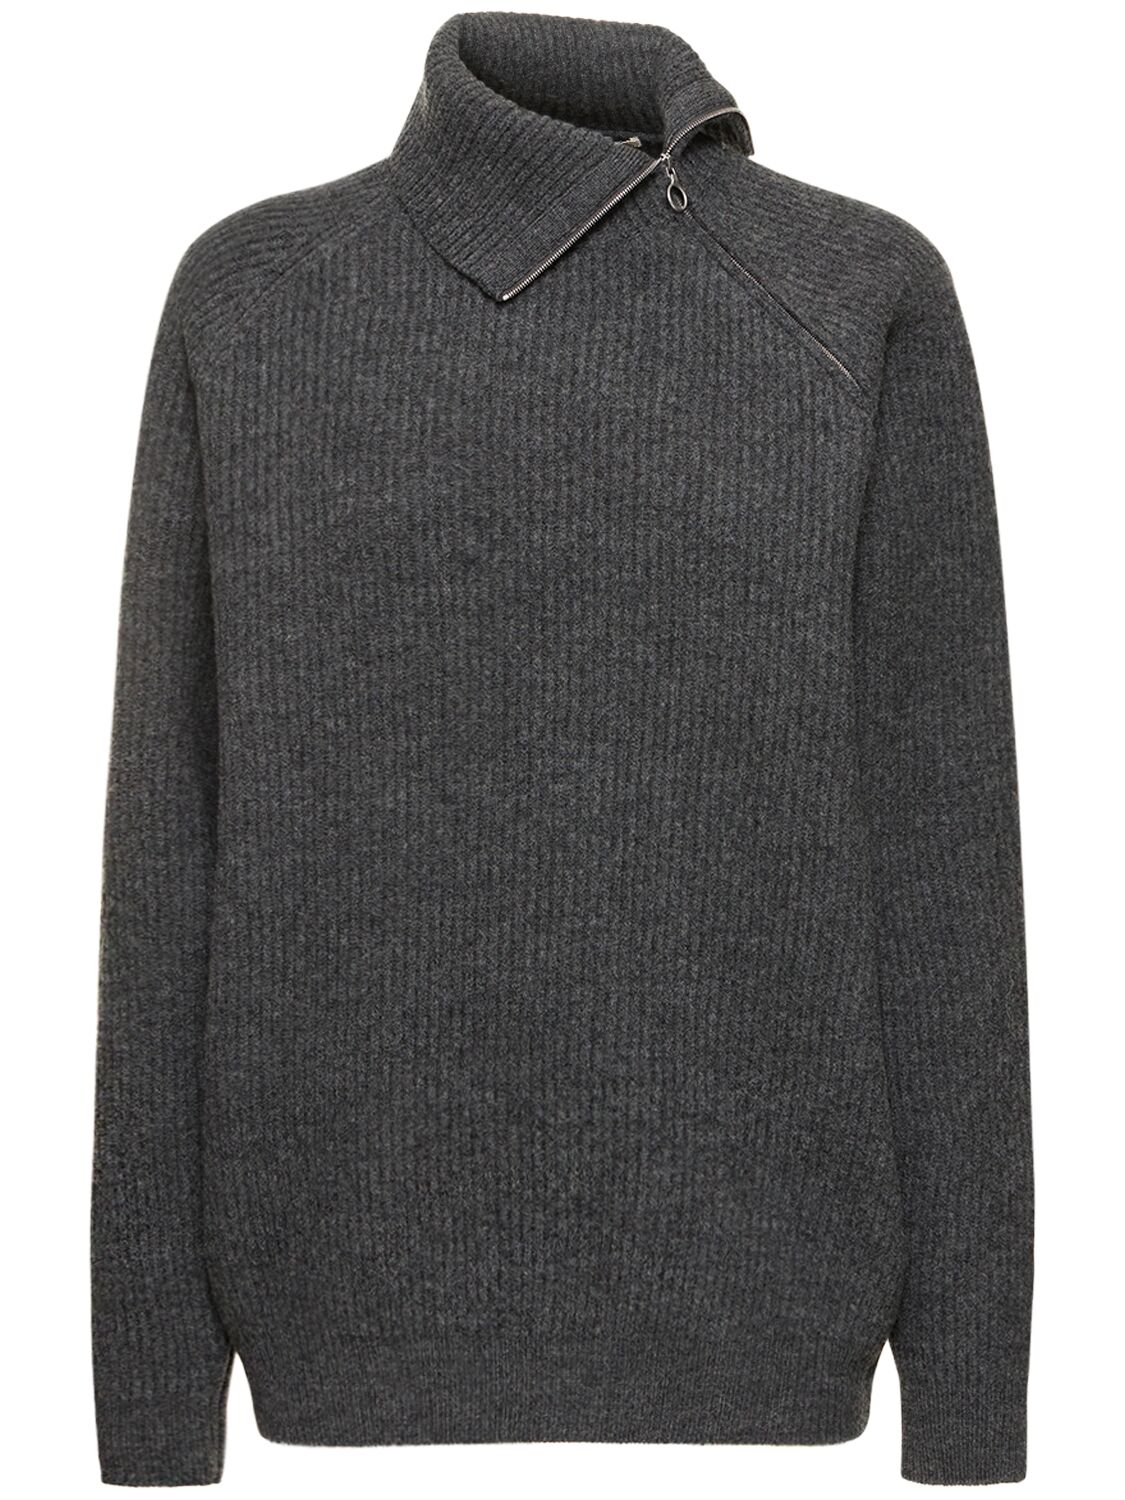 Image of Milled Wool Knit Sweater